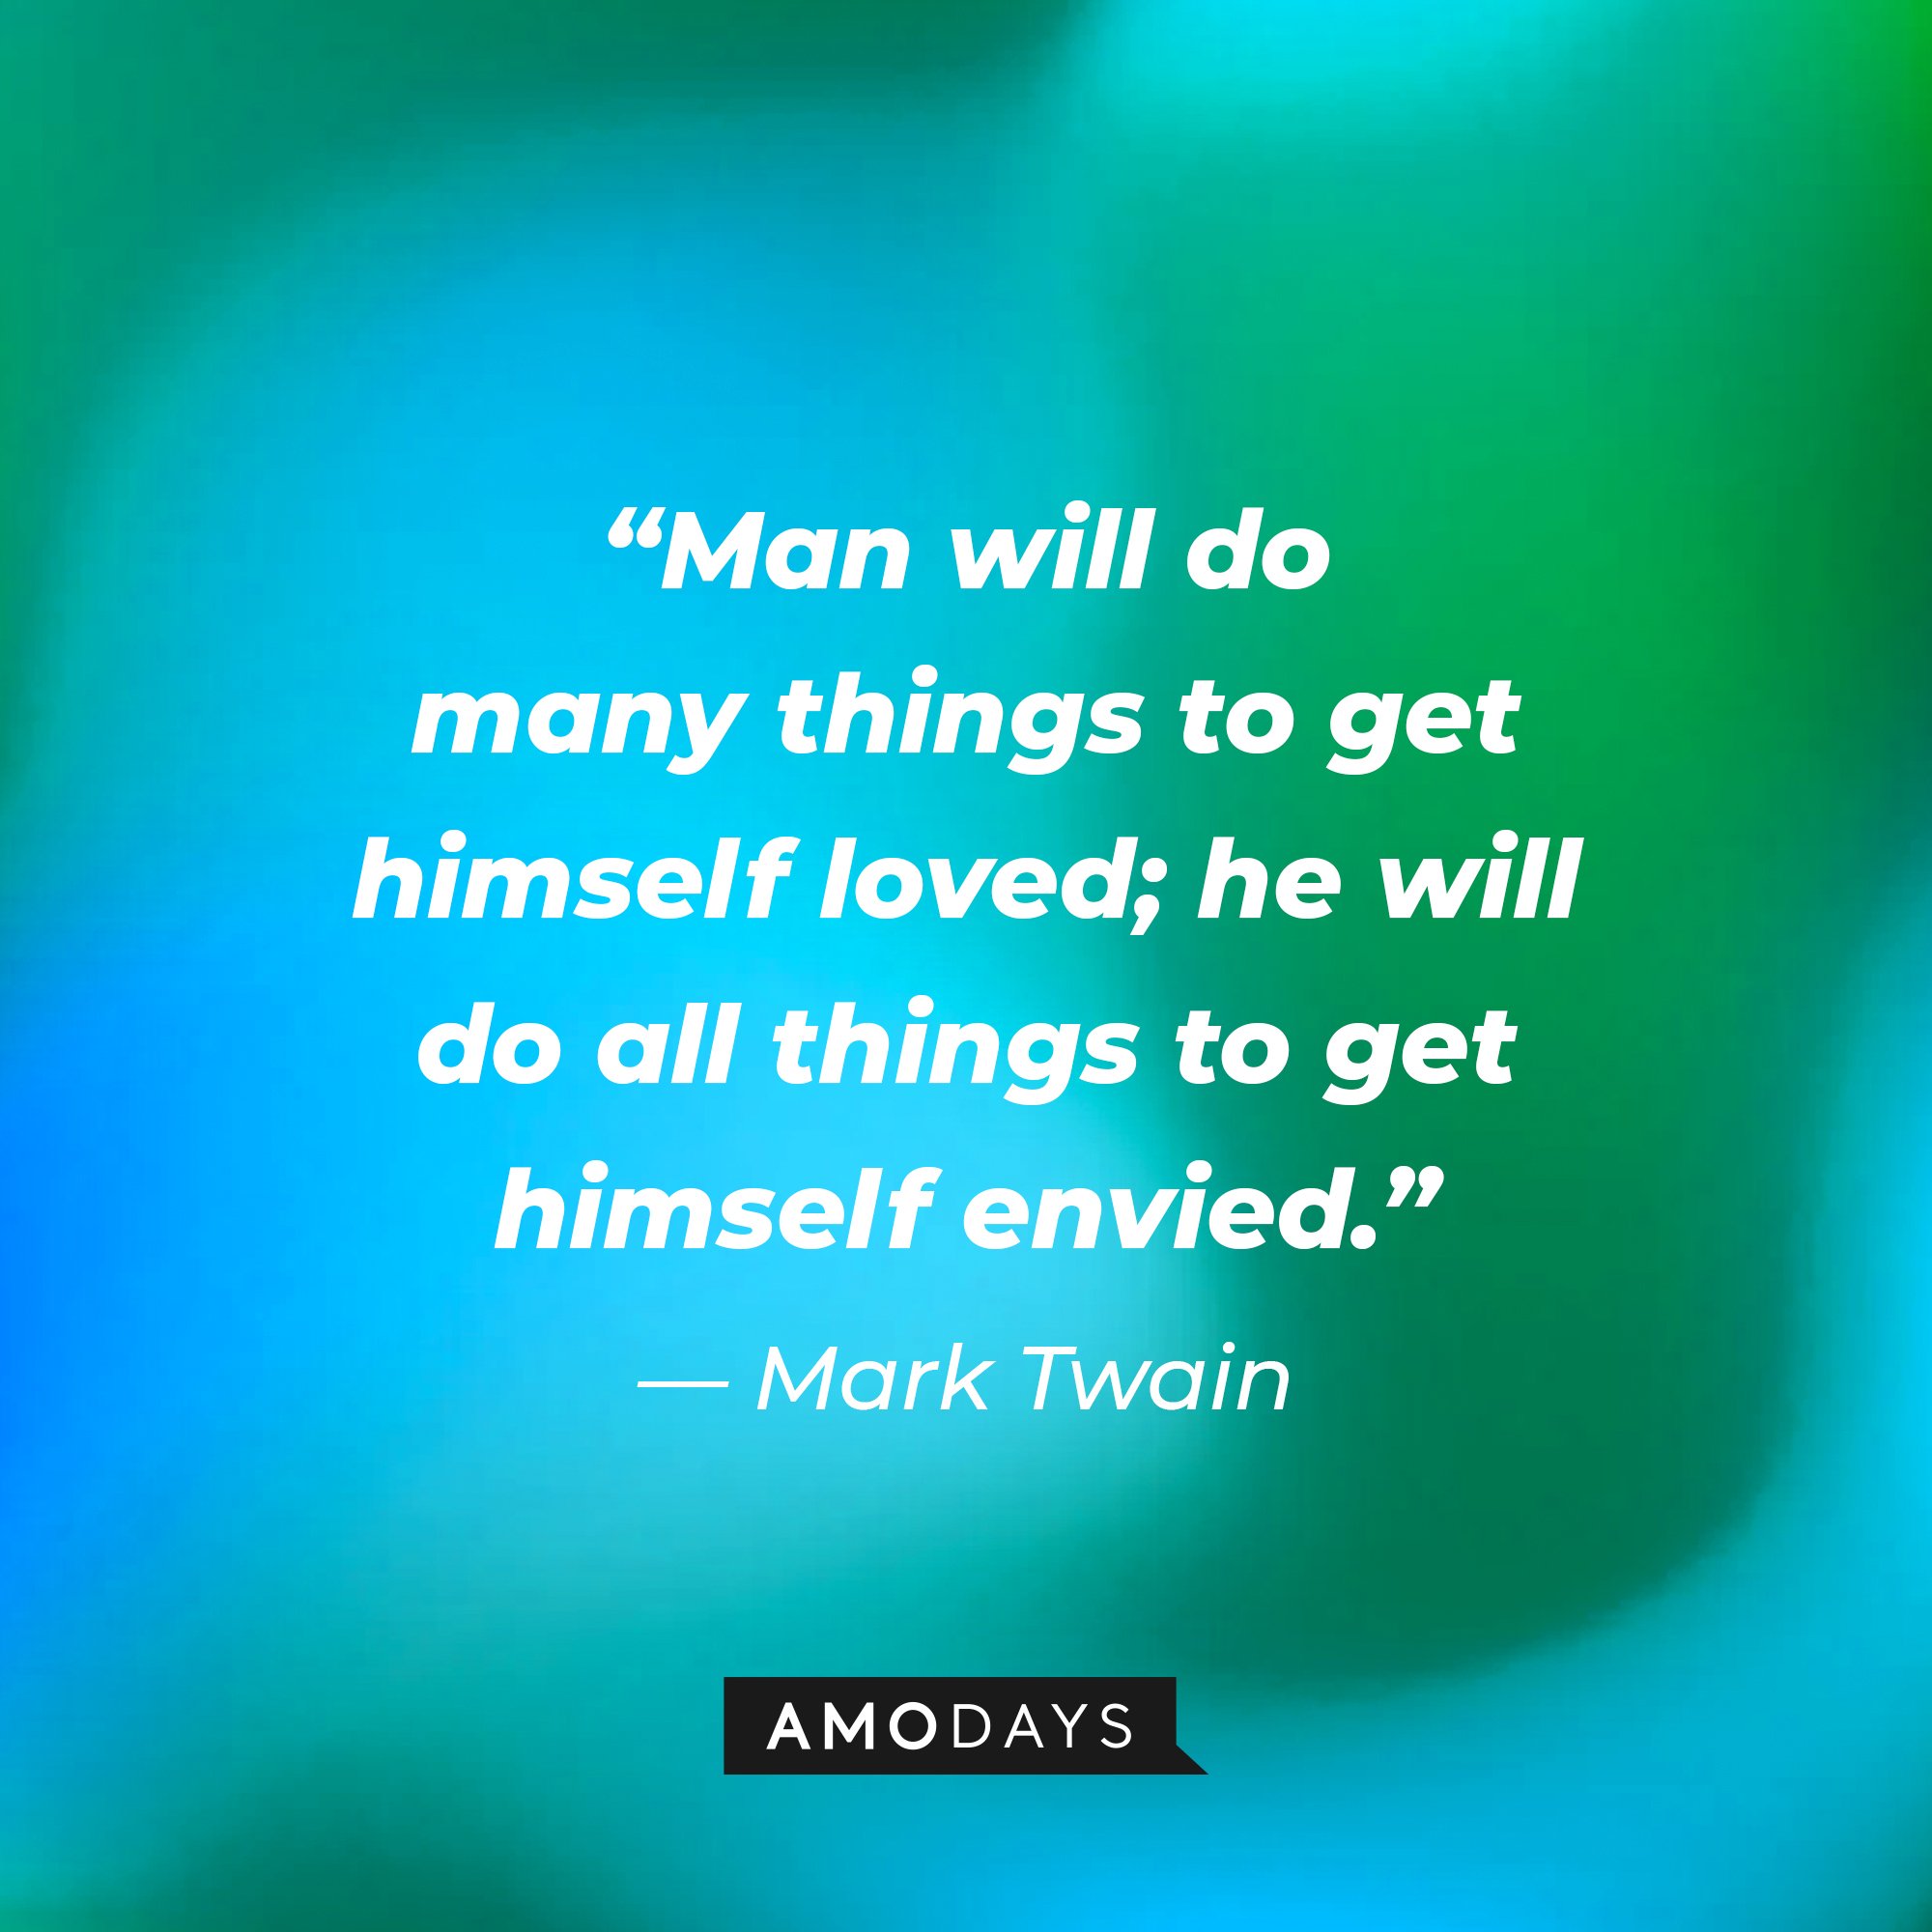 Mark Twain's quote: “Man will do many things to get himself loved; he will do all things to get himself envied.” | Image: AmoDays